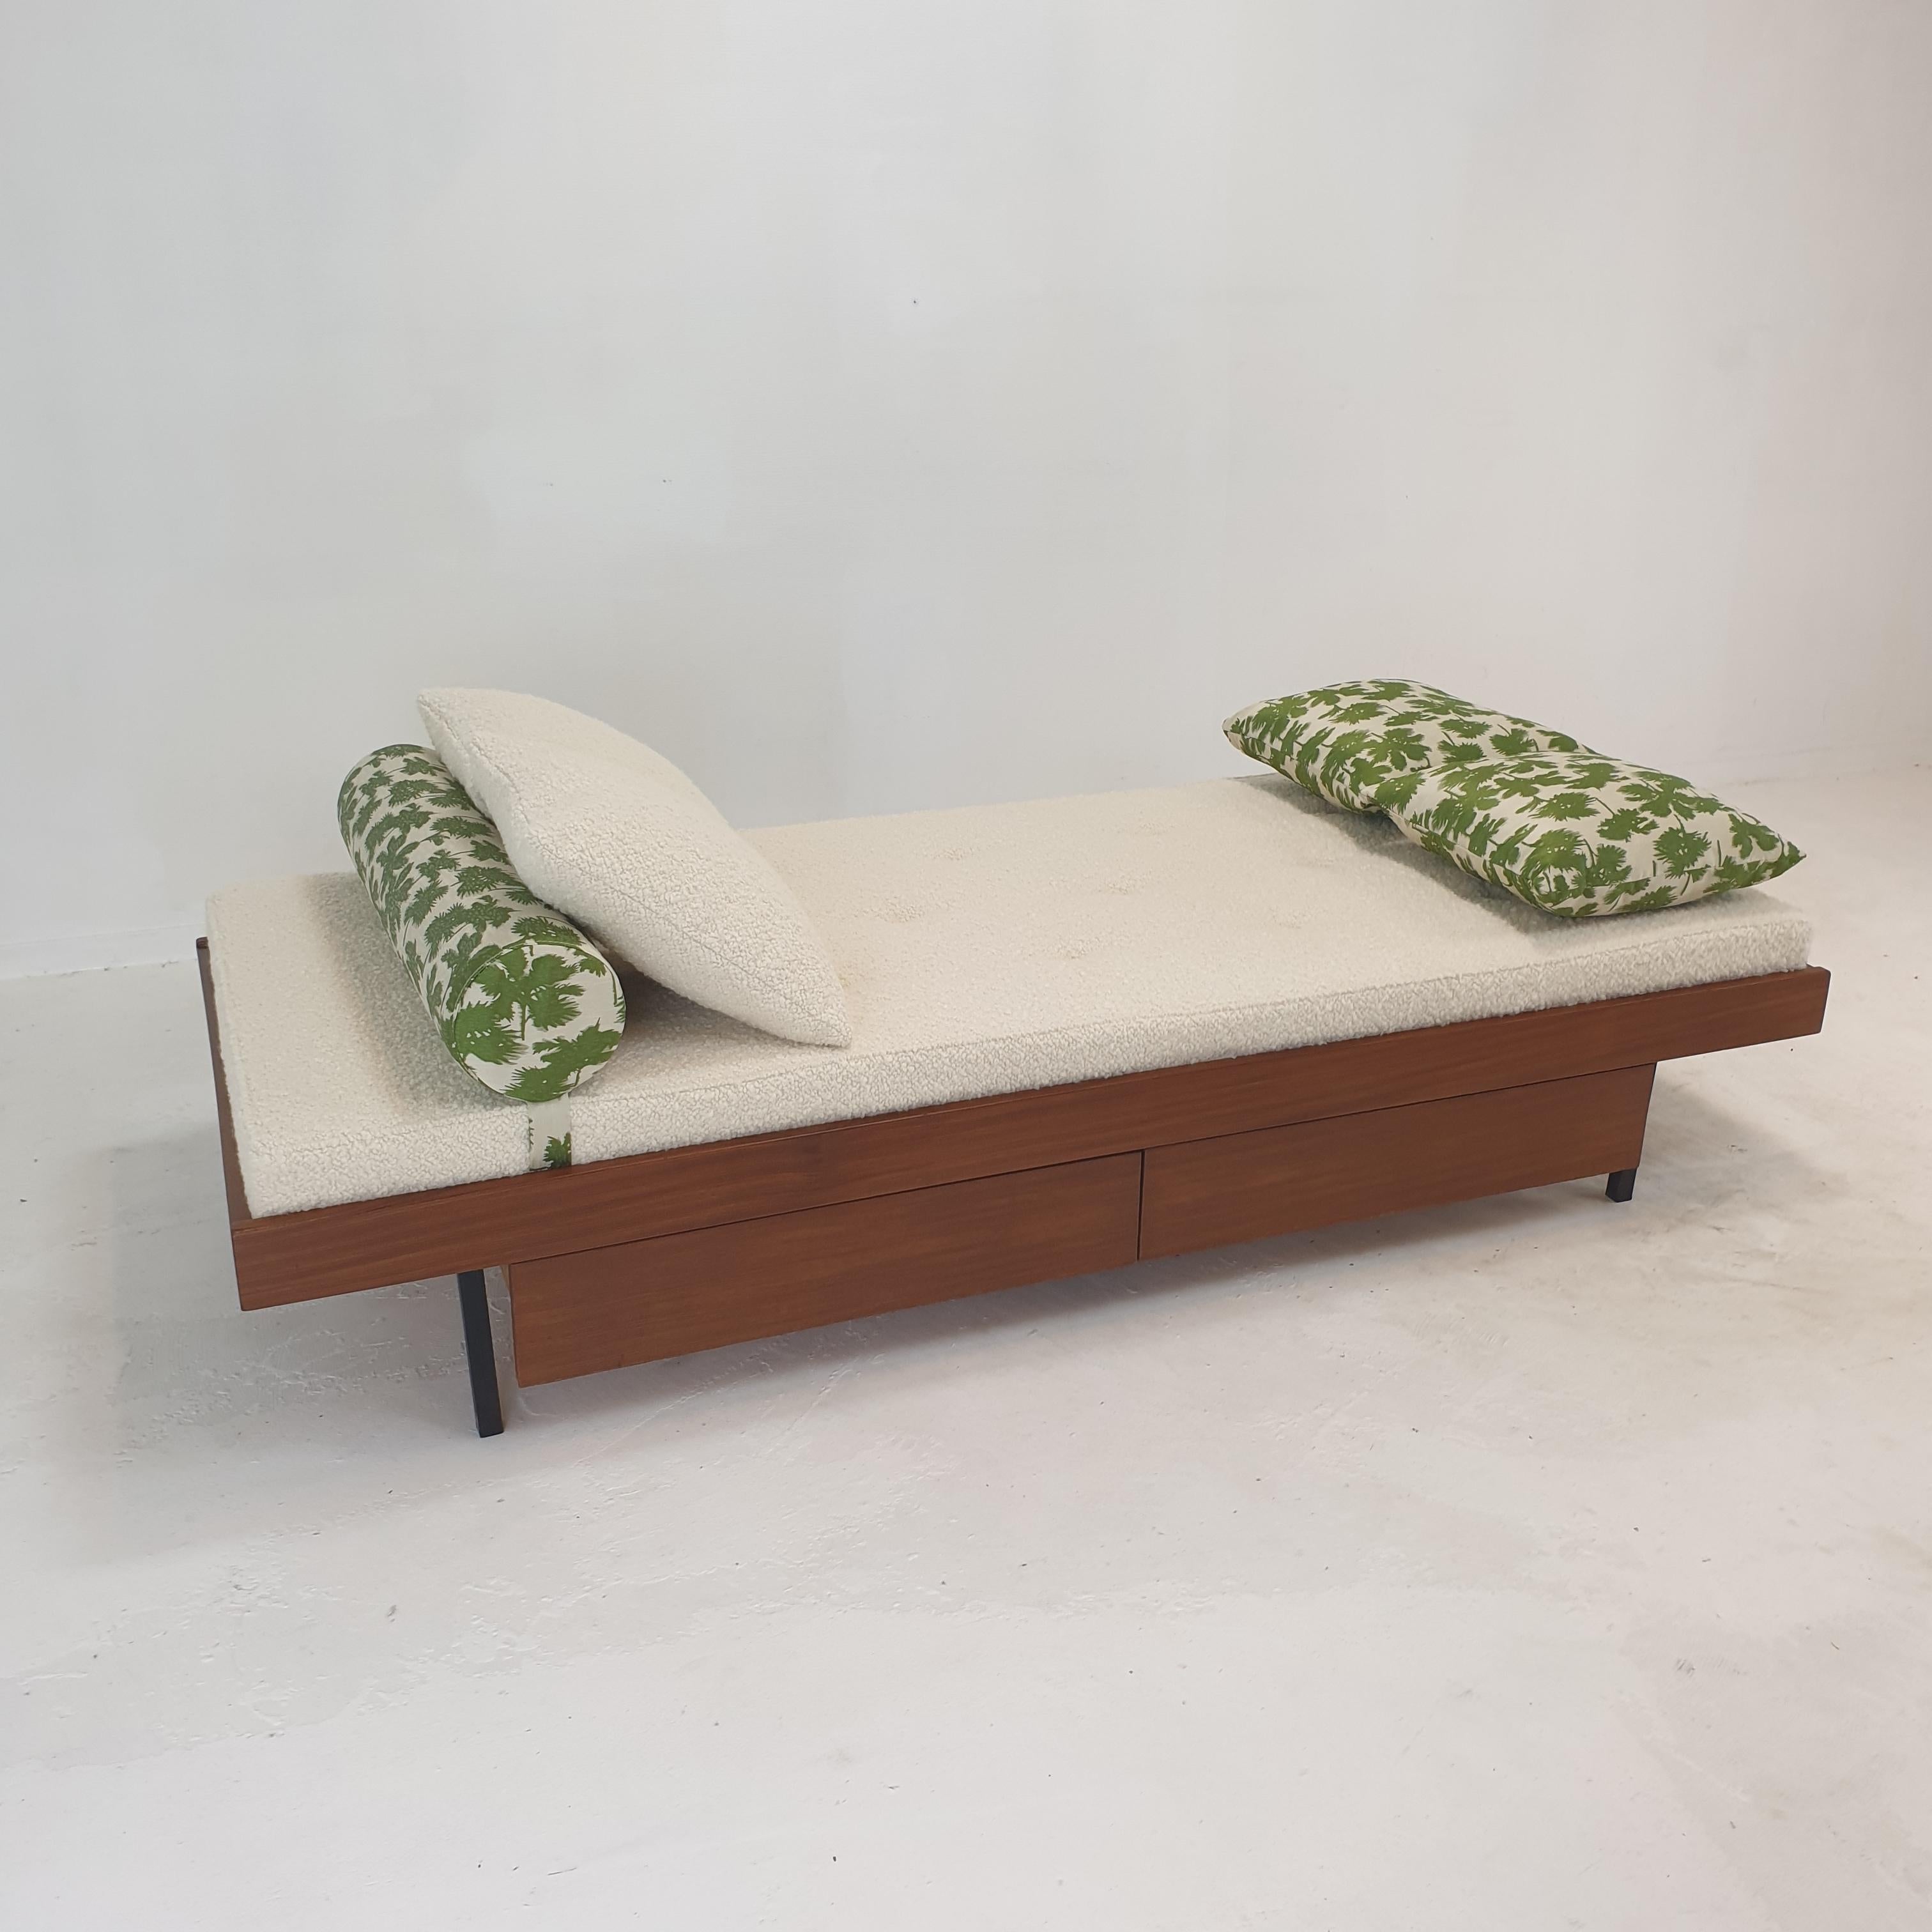 Mid-20th Century Teak Daybed with Dedar Cushions and Bolster, 1960s For Sale